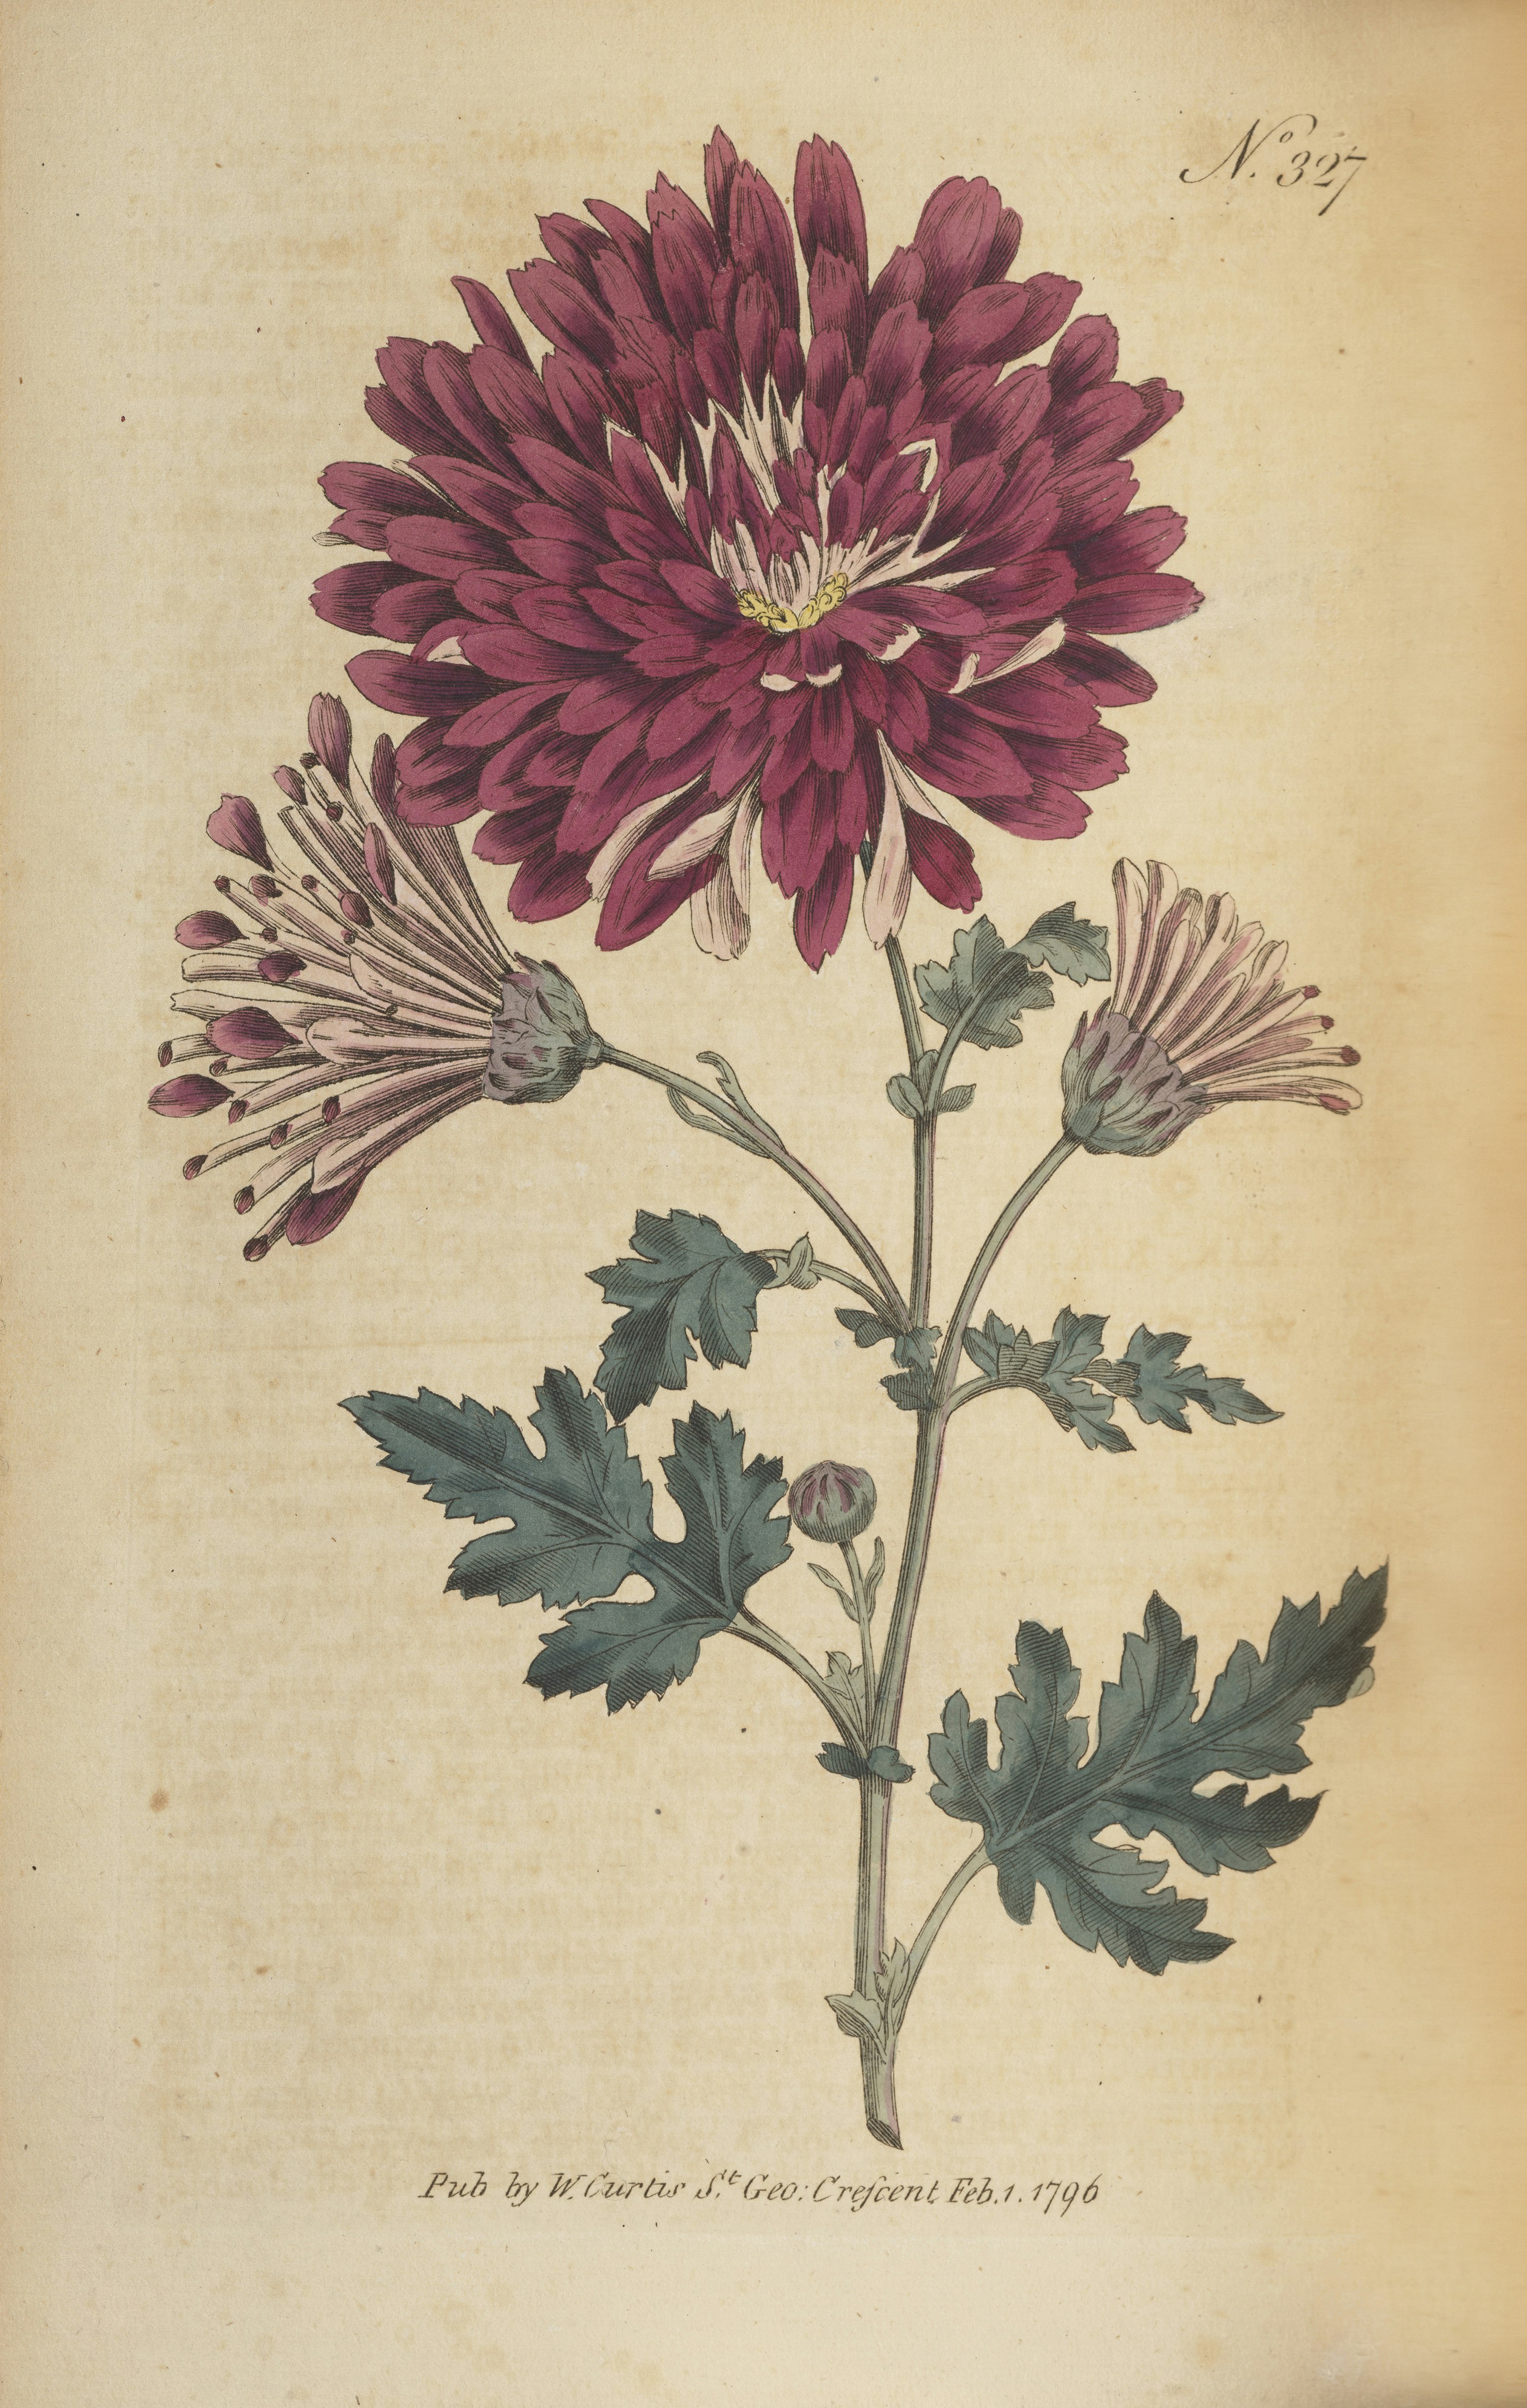 A botanical illustration of a red geranium type flower with green leaves.